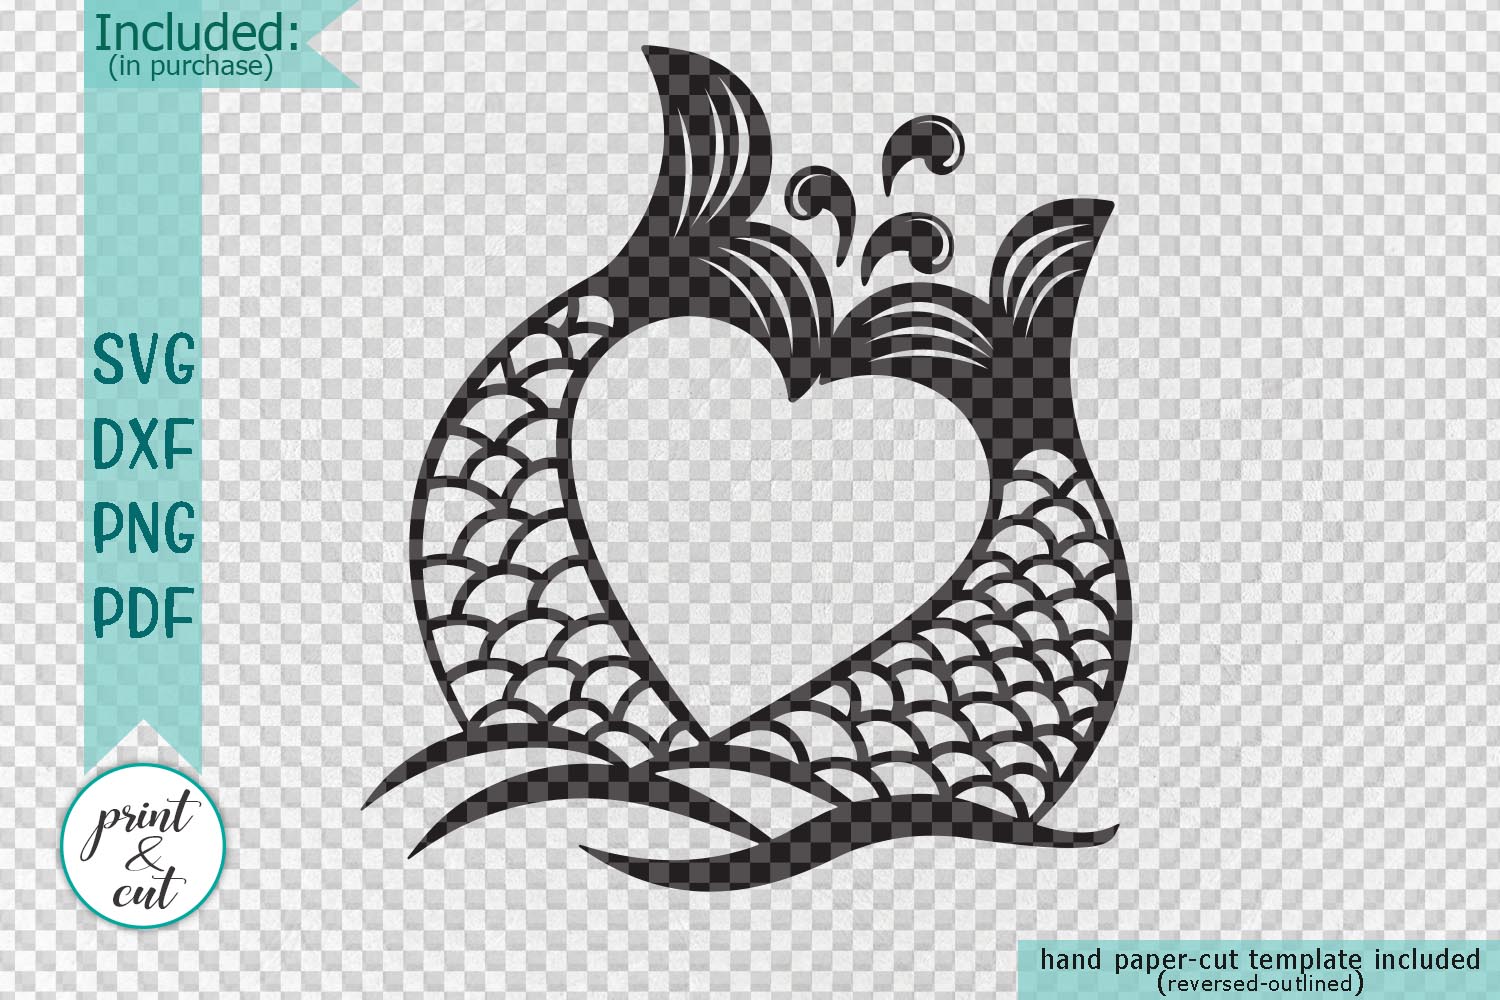 Couple mermaid tails heart shape svg dxf cut out template ...